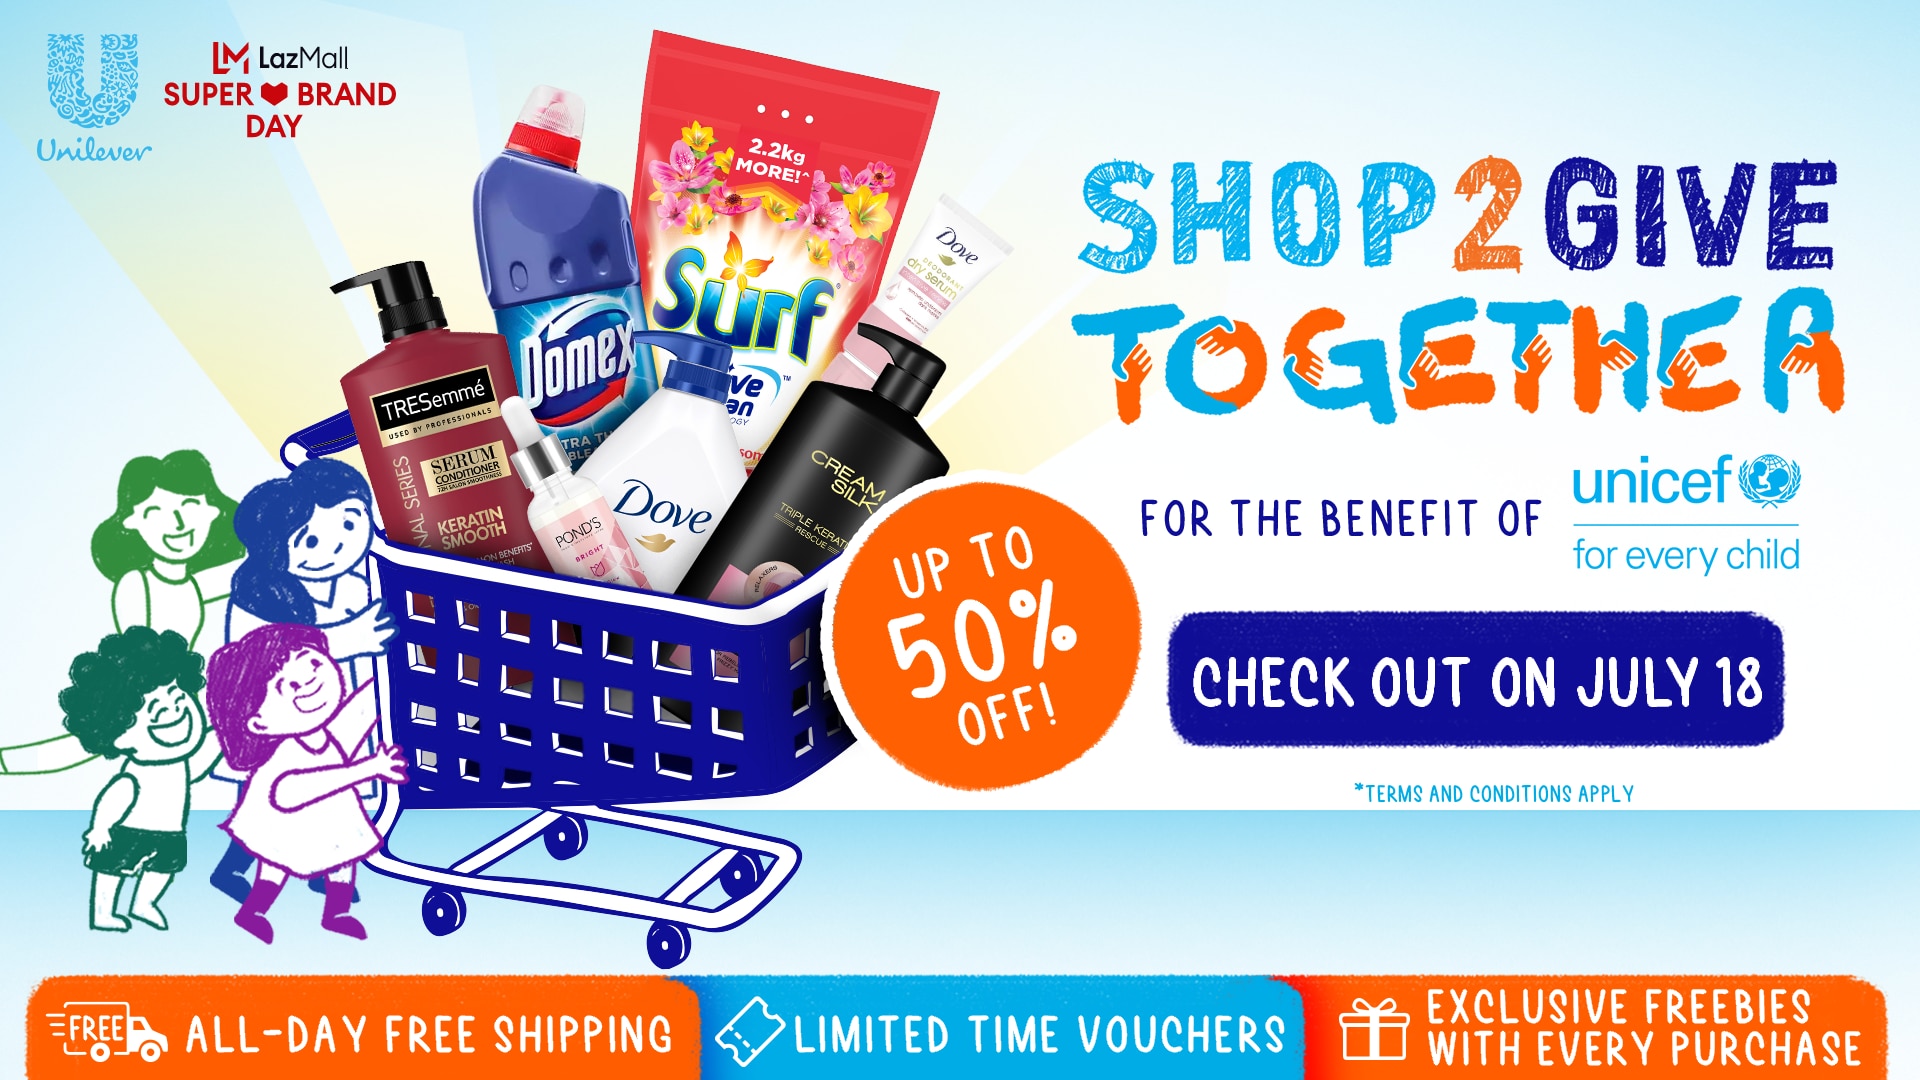 Help a child or a family by purchasing Unilever products on July 18 at Lazada. Receive 50%25 discount, all-day free shipping, limited time vouchers, and exclusive freebies with every purchase. Photo source: Unilever Philippines